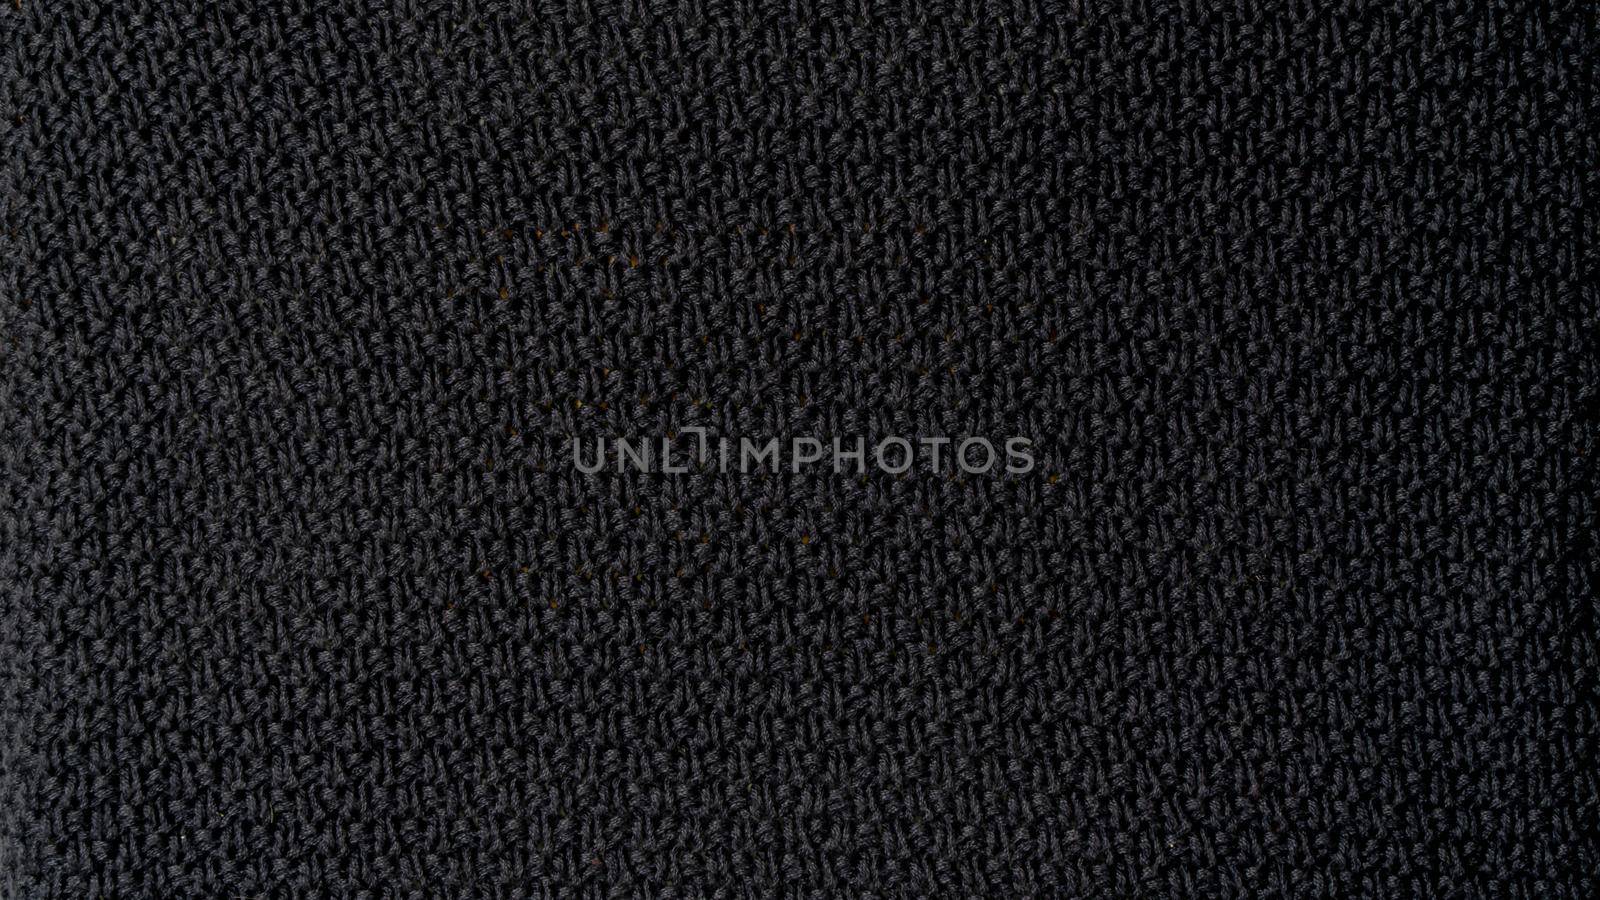 Dark background textile texture knitting weaving. High quality photo